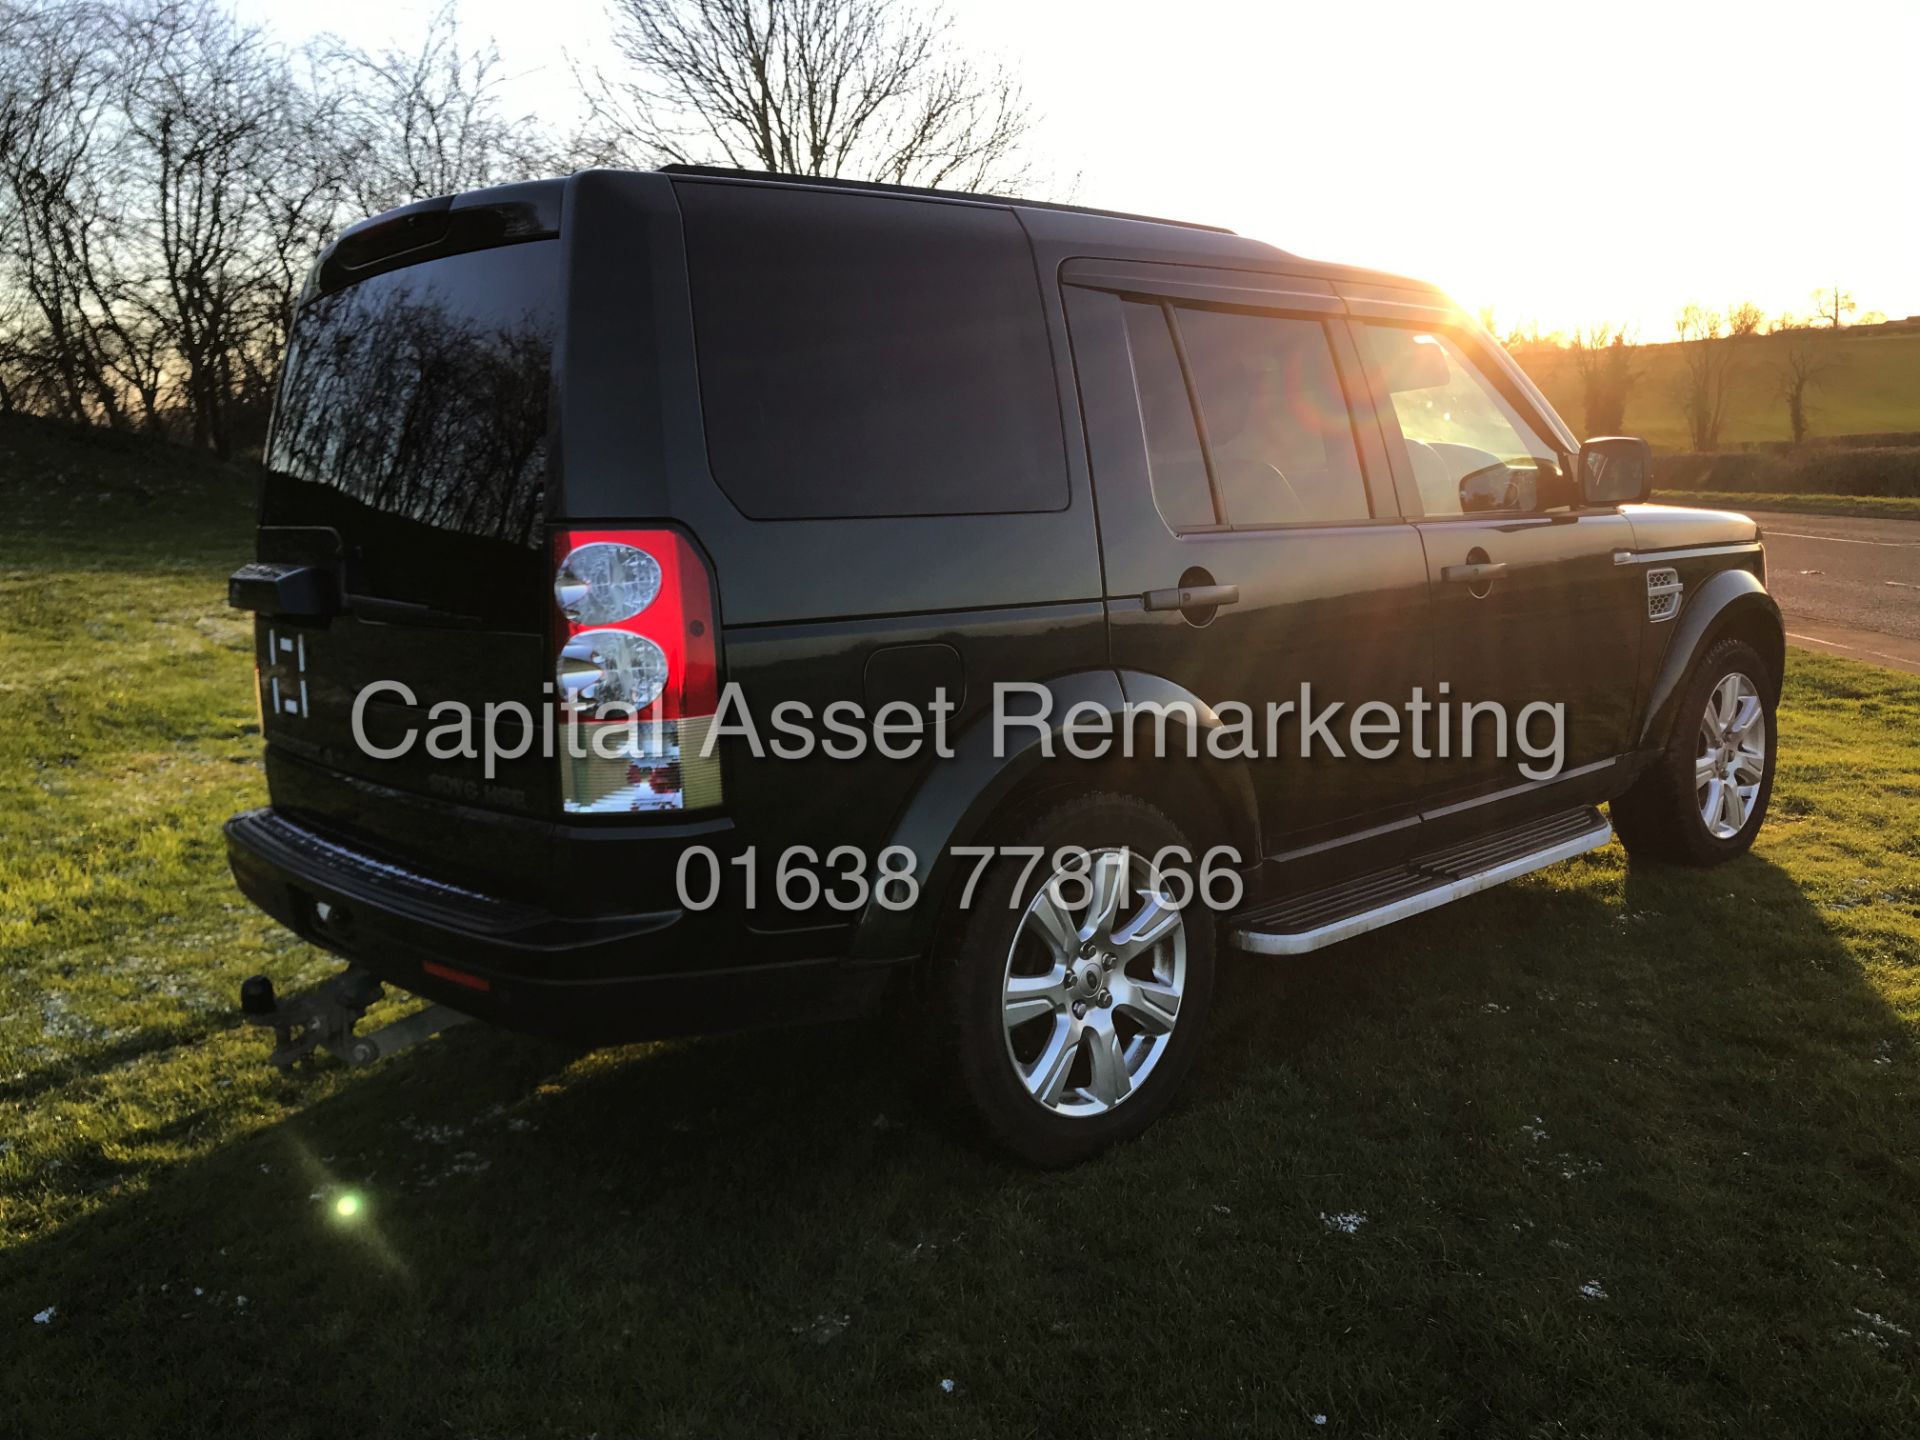 LAND ROVER DISCOVERY 4 "HSE" 3.0 SDV6 AUTOMATIC (13 REG) 7 SEATER **TOP OF THE RANGE** FULLY LOADED - Image 6 of 31